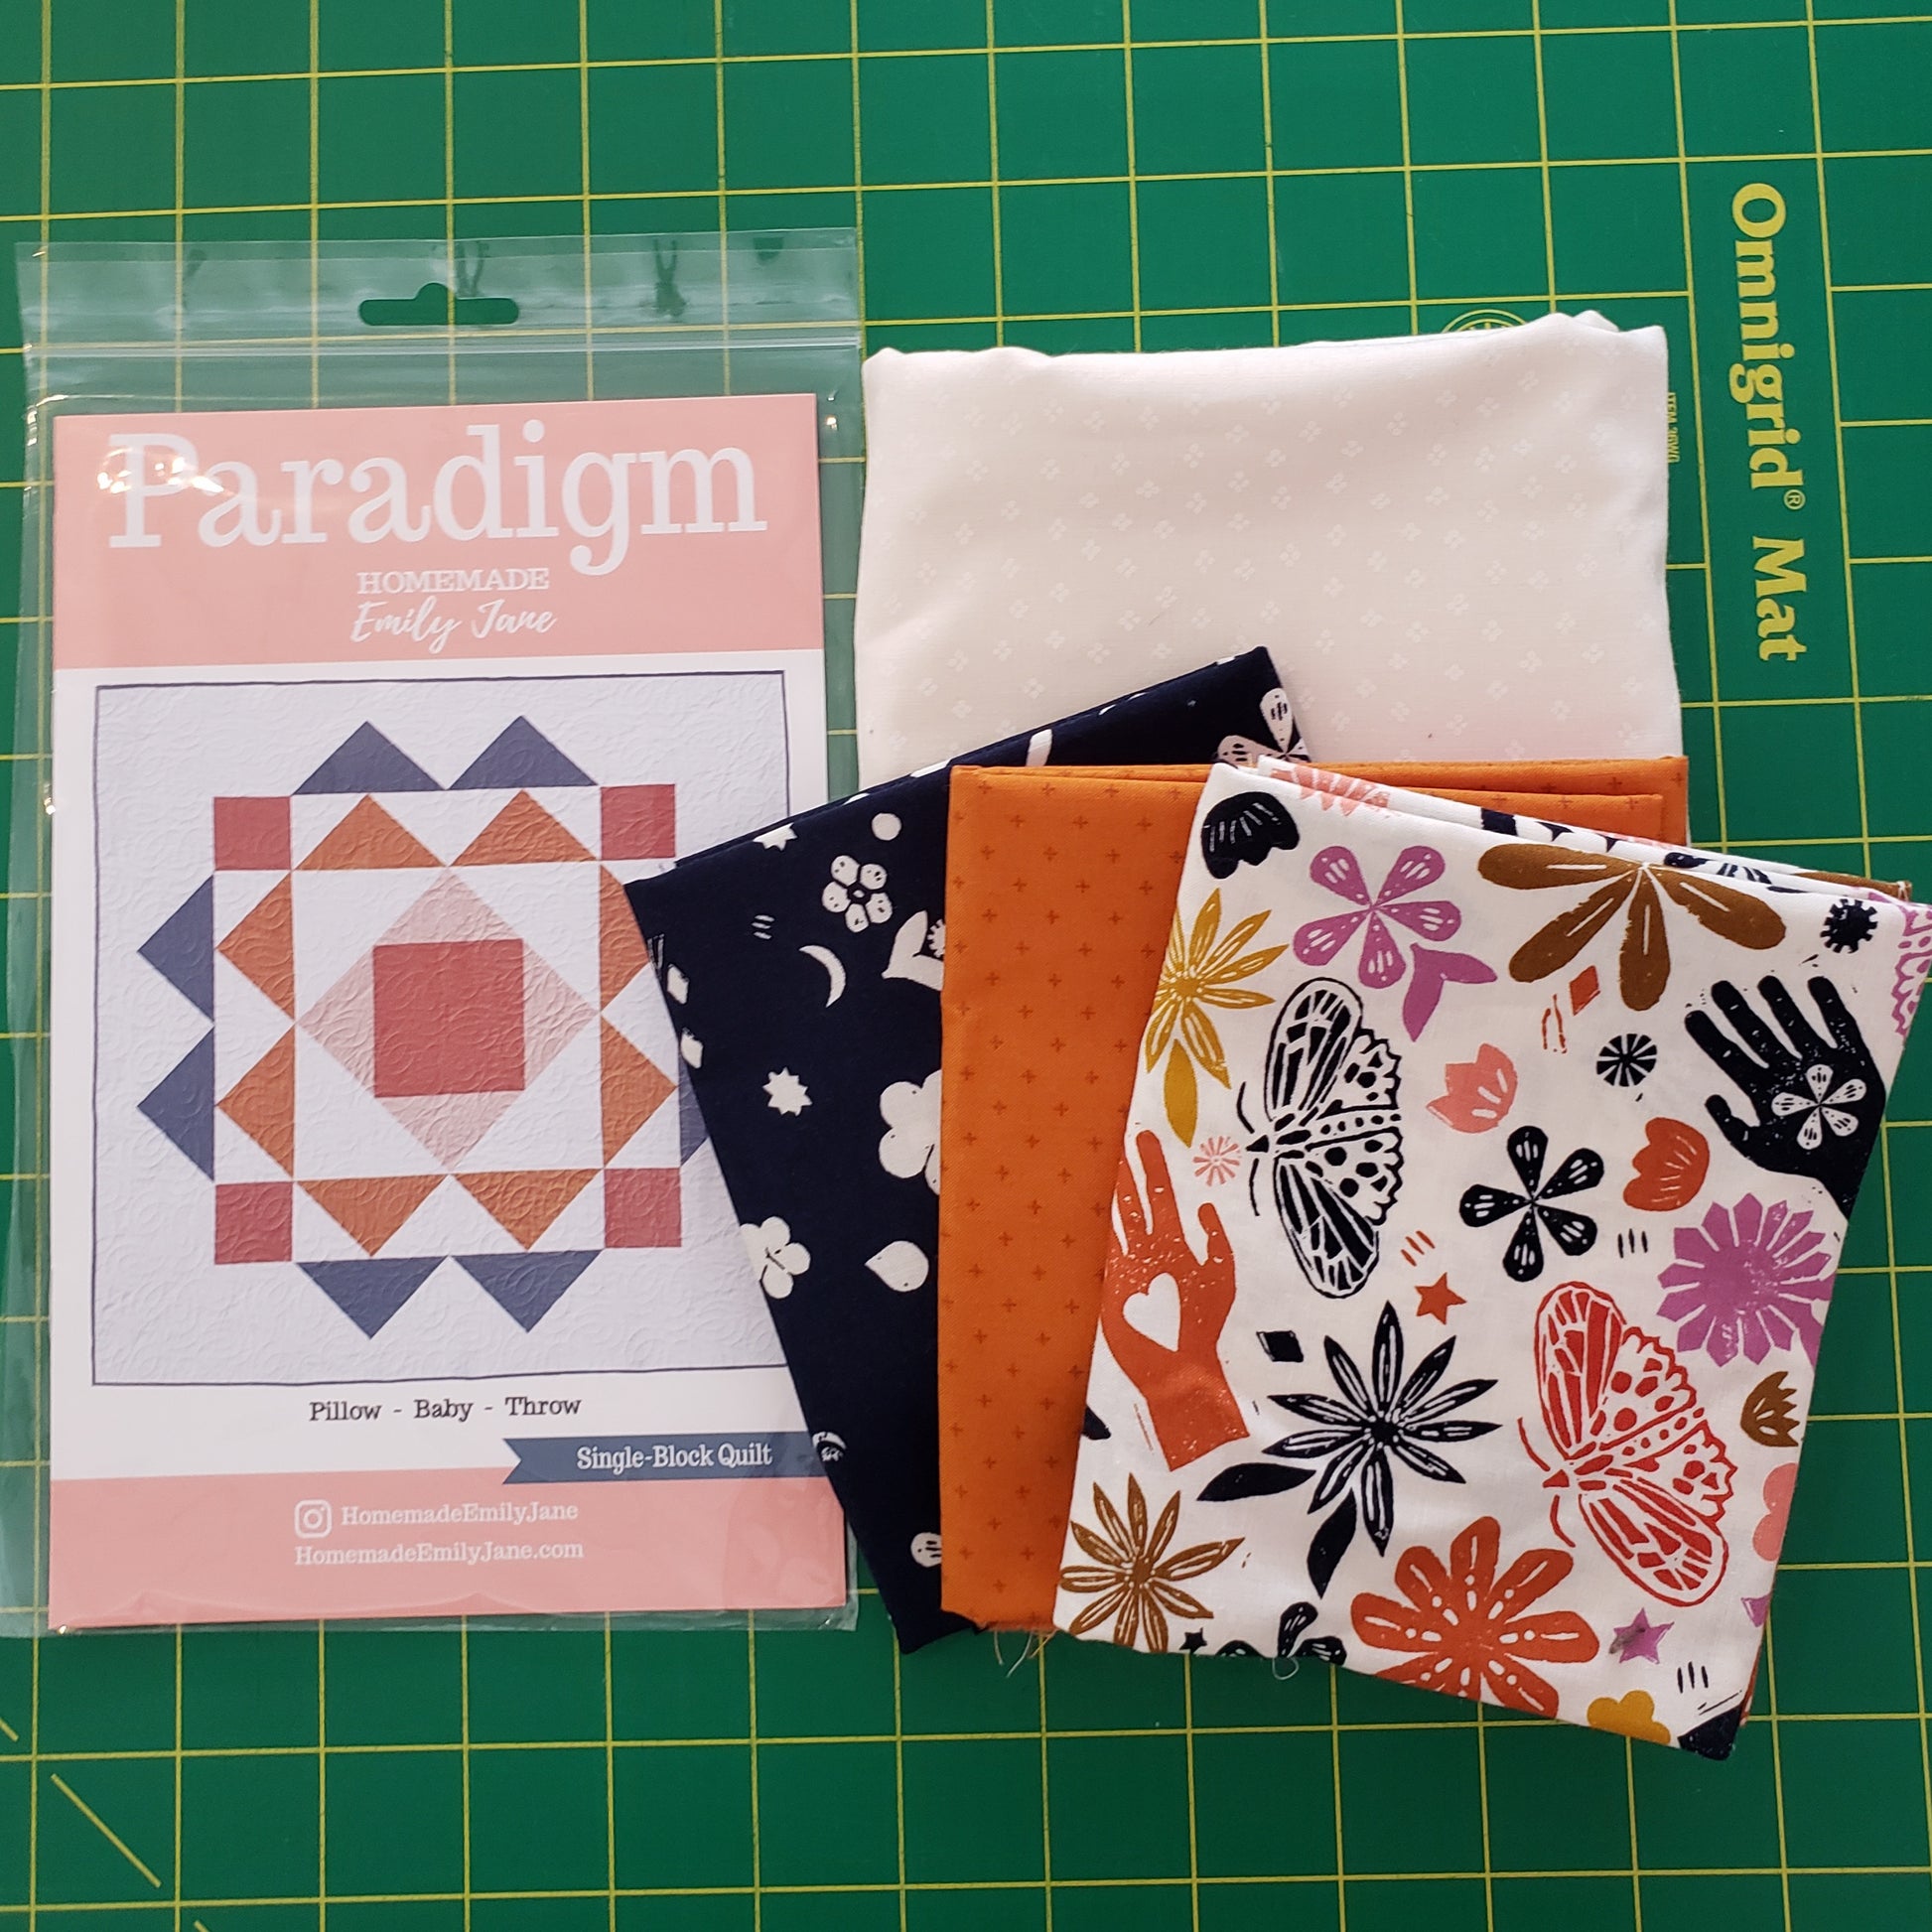 precut fabric with quilt pattern